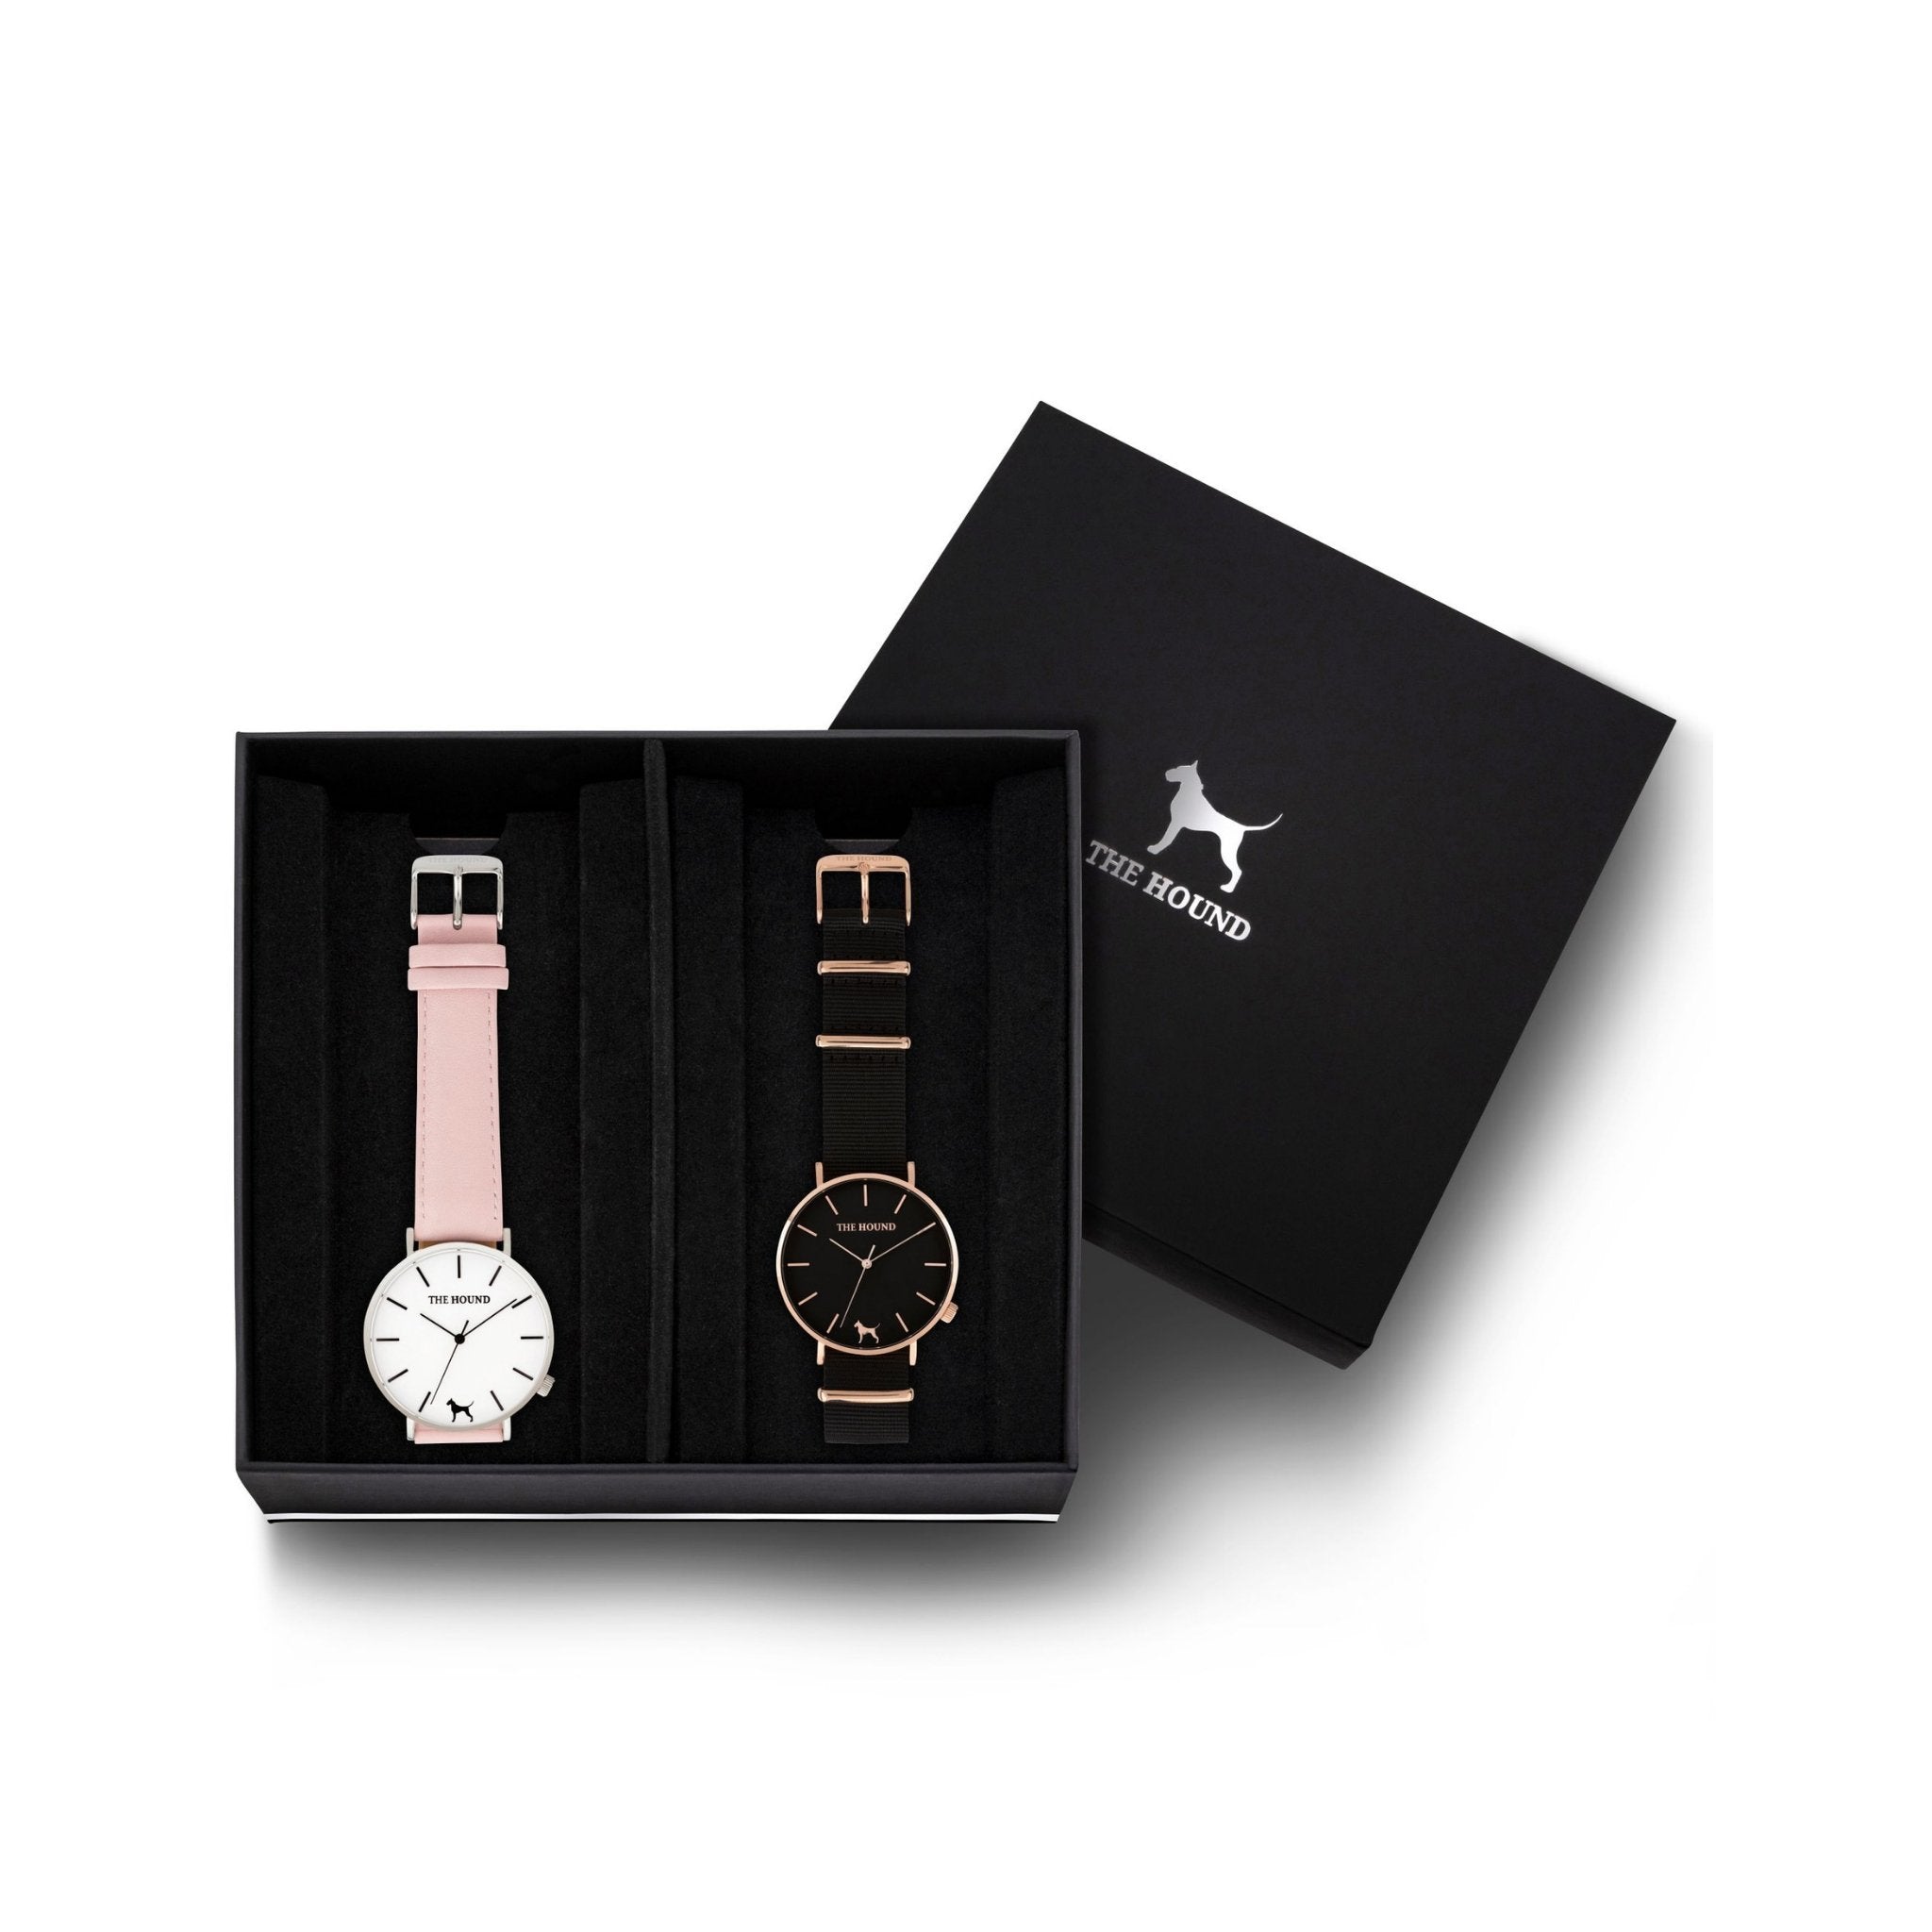 Custom gift set - Silver and white watch with stitched blush pink genuine leather band and a rose gold and black watch with black nato leather band